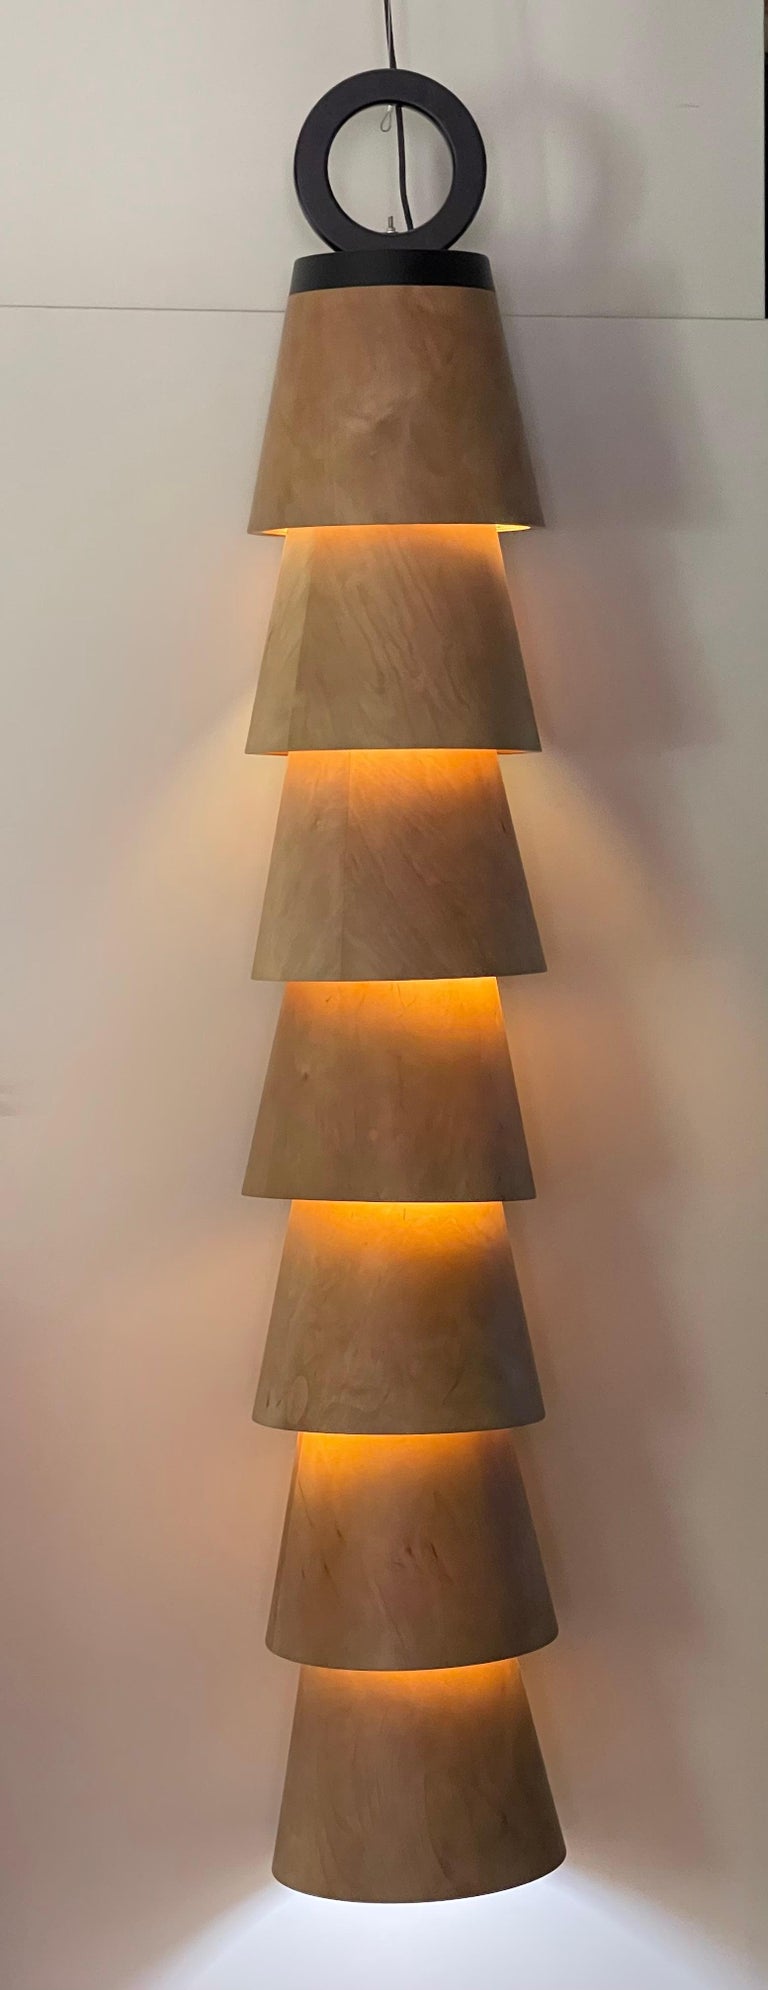 "LOLA" Sculptural Lamp 81" x 13" inch by Grigorii Gorkovenko

MATERIAL: wood
COLOR: nature / black

Lampshade only. 
Wires and lightbulb are not included. 

LOLA lamp:
A module lamp that consists of the lighting cones connected by one pivot